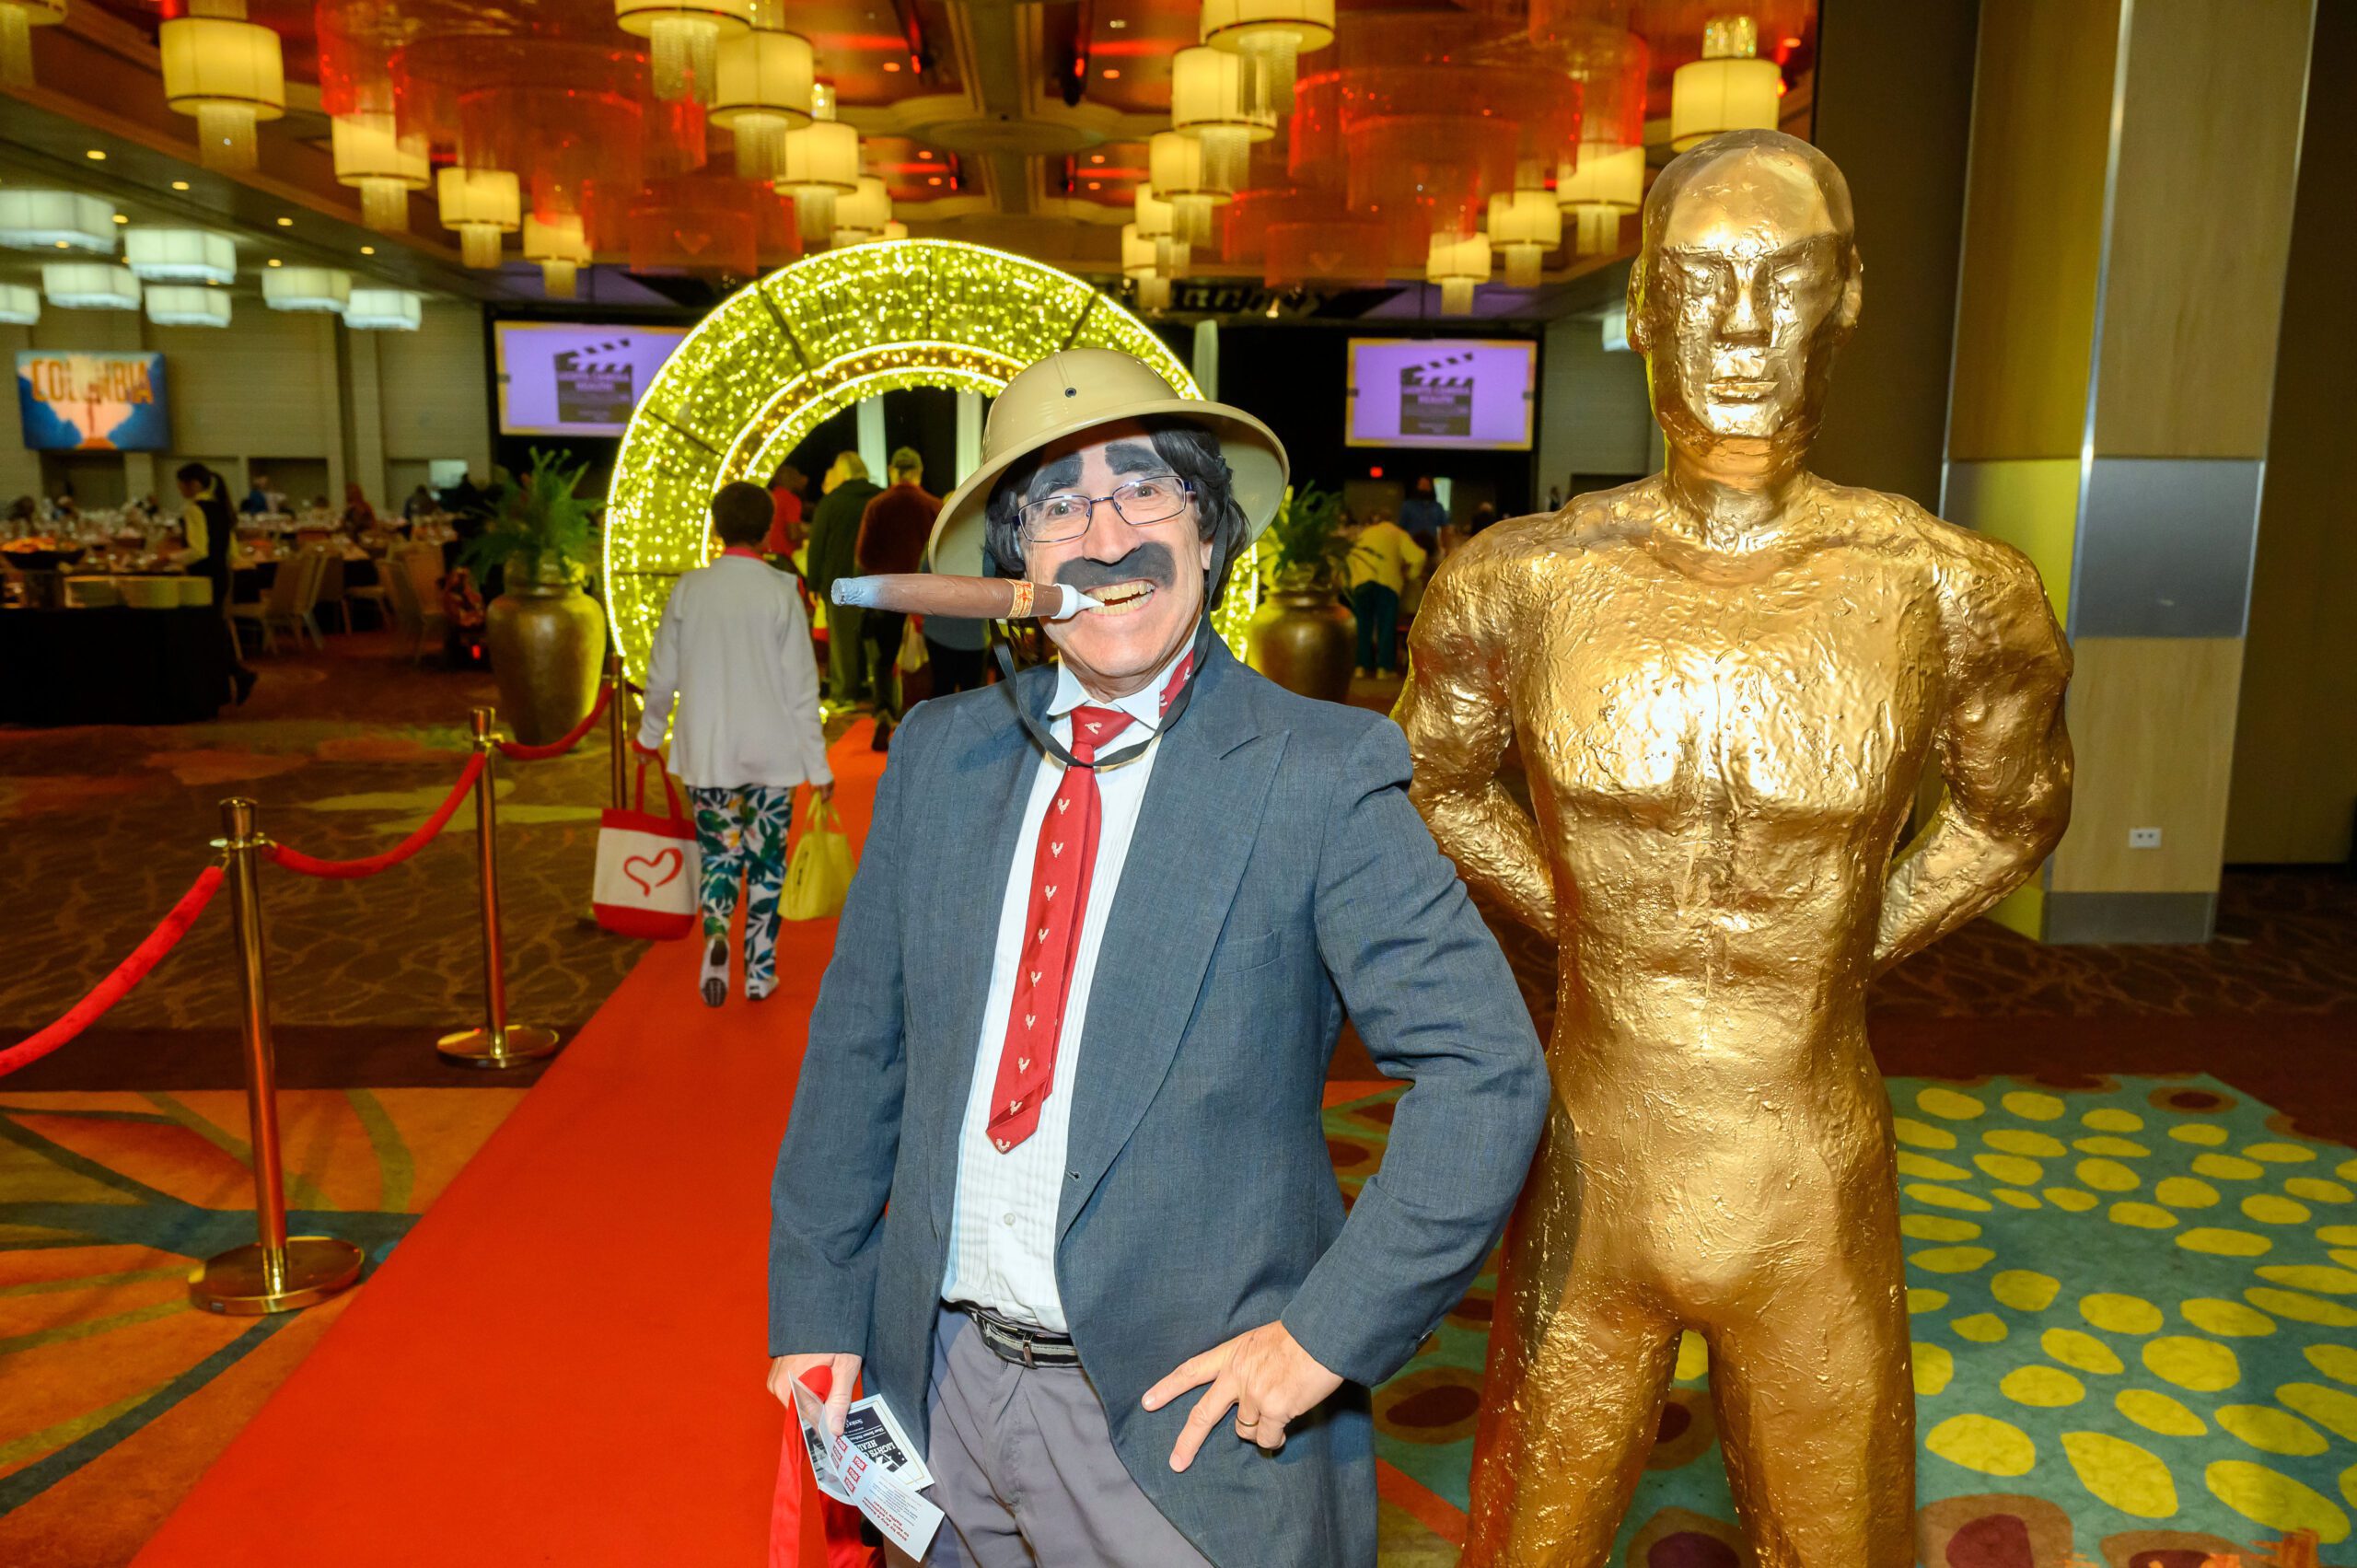 Man dressed as safari person with novelty cigar standing next to golden statue